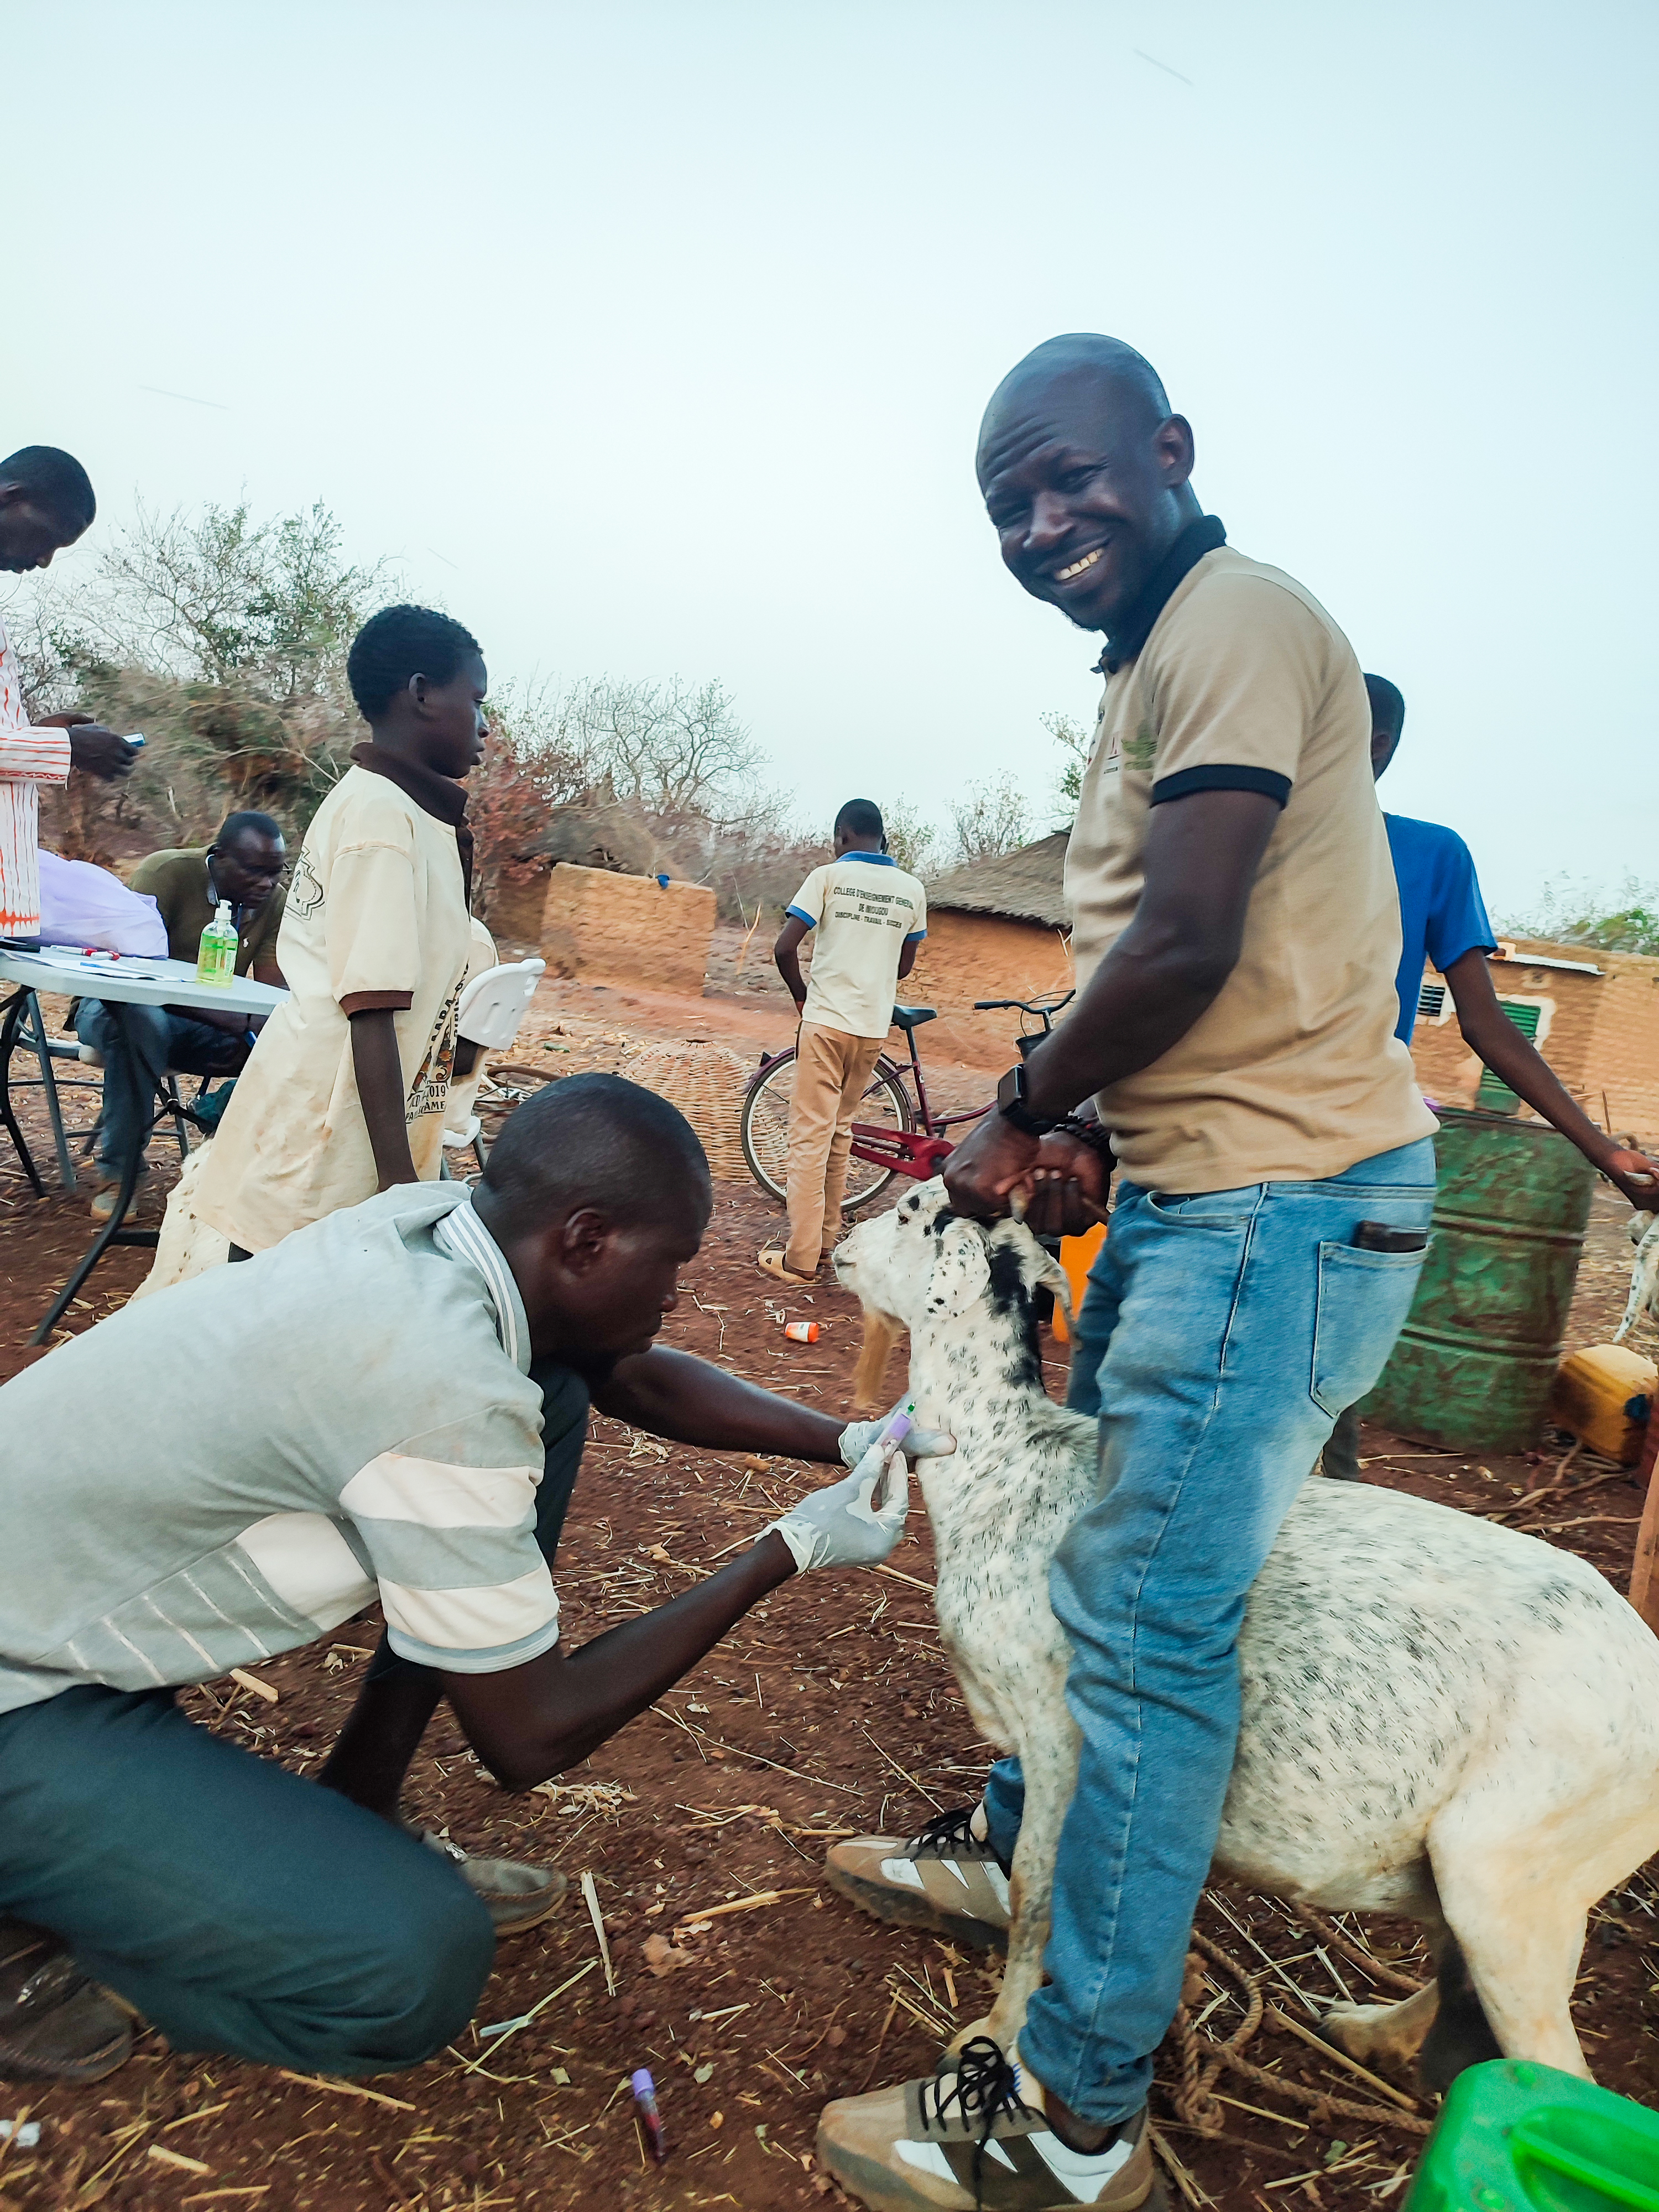 Abdoul on the right helping a field worker take a blood sample